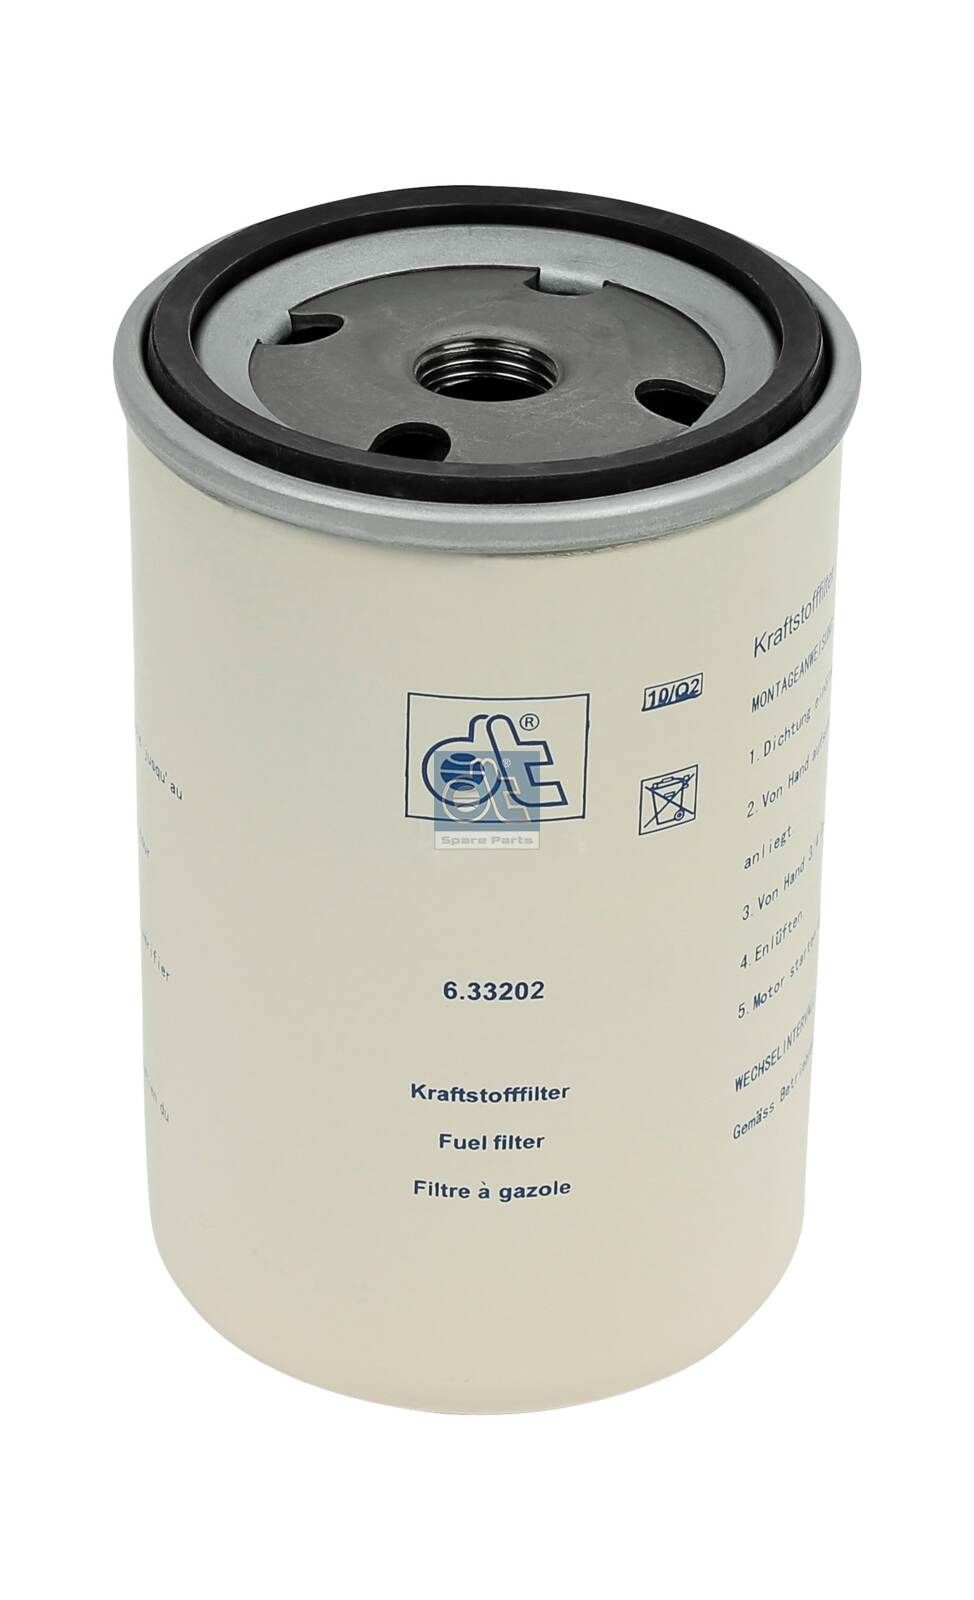 WK 727 DT Spare Parts 6.33202 Fuel filter 0870017560